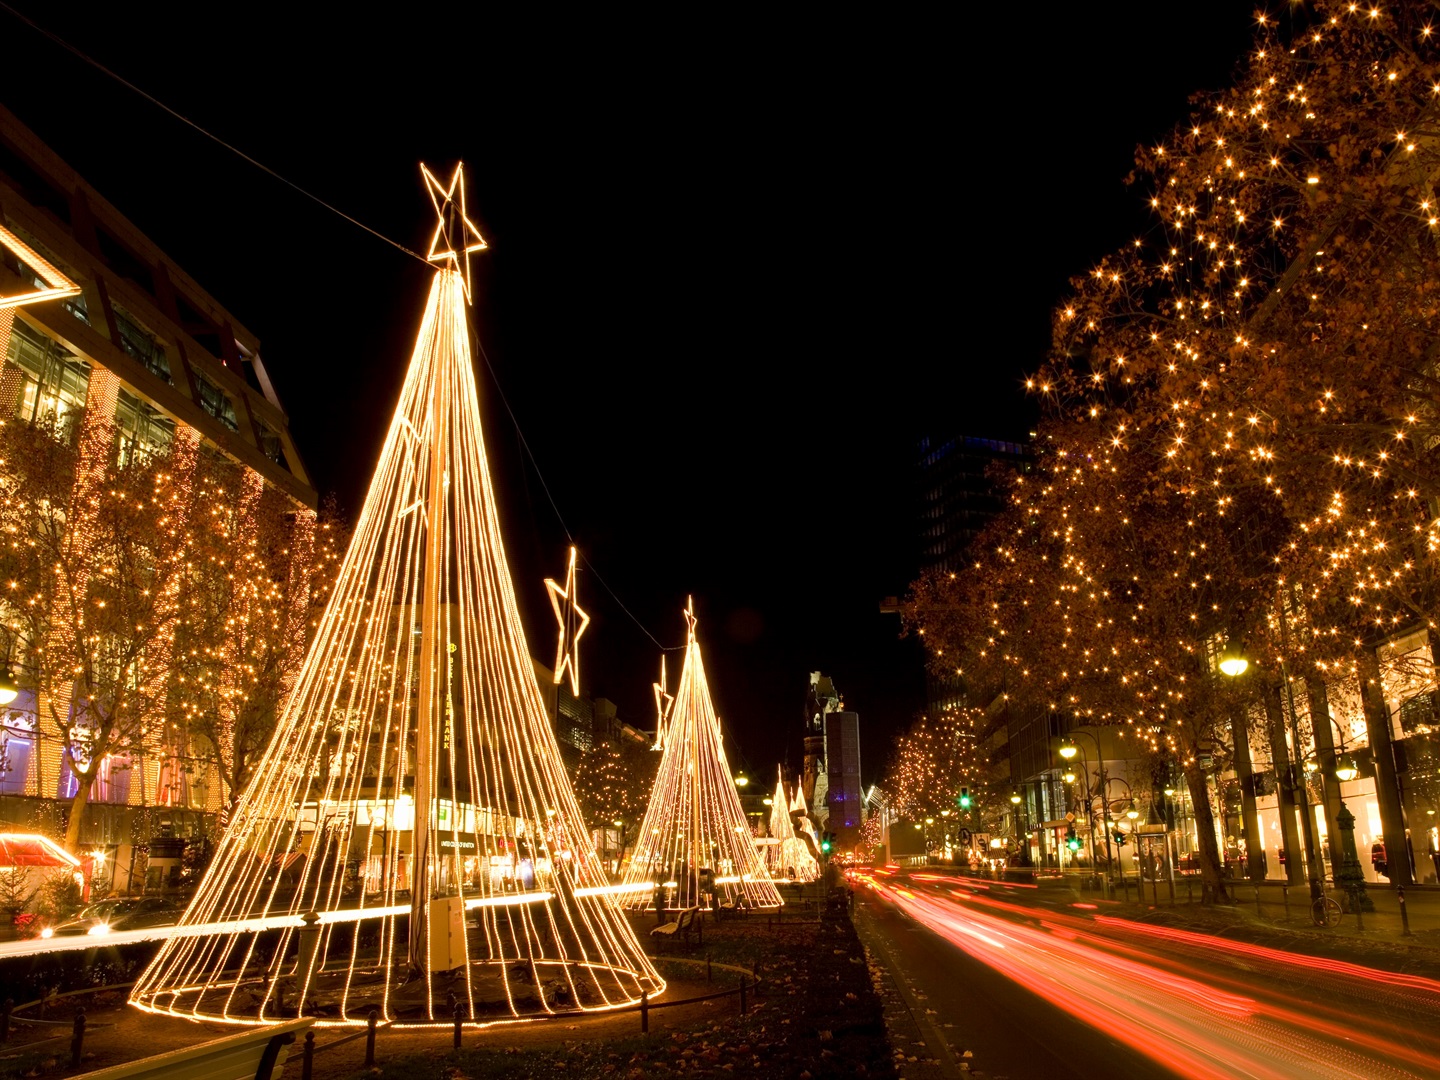 30 jaw-dropping holiday light displays from around the world